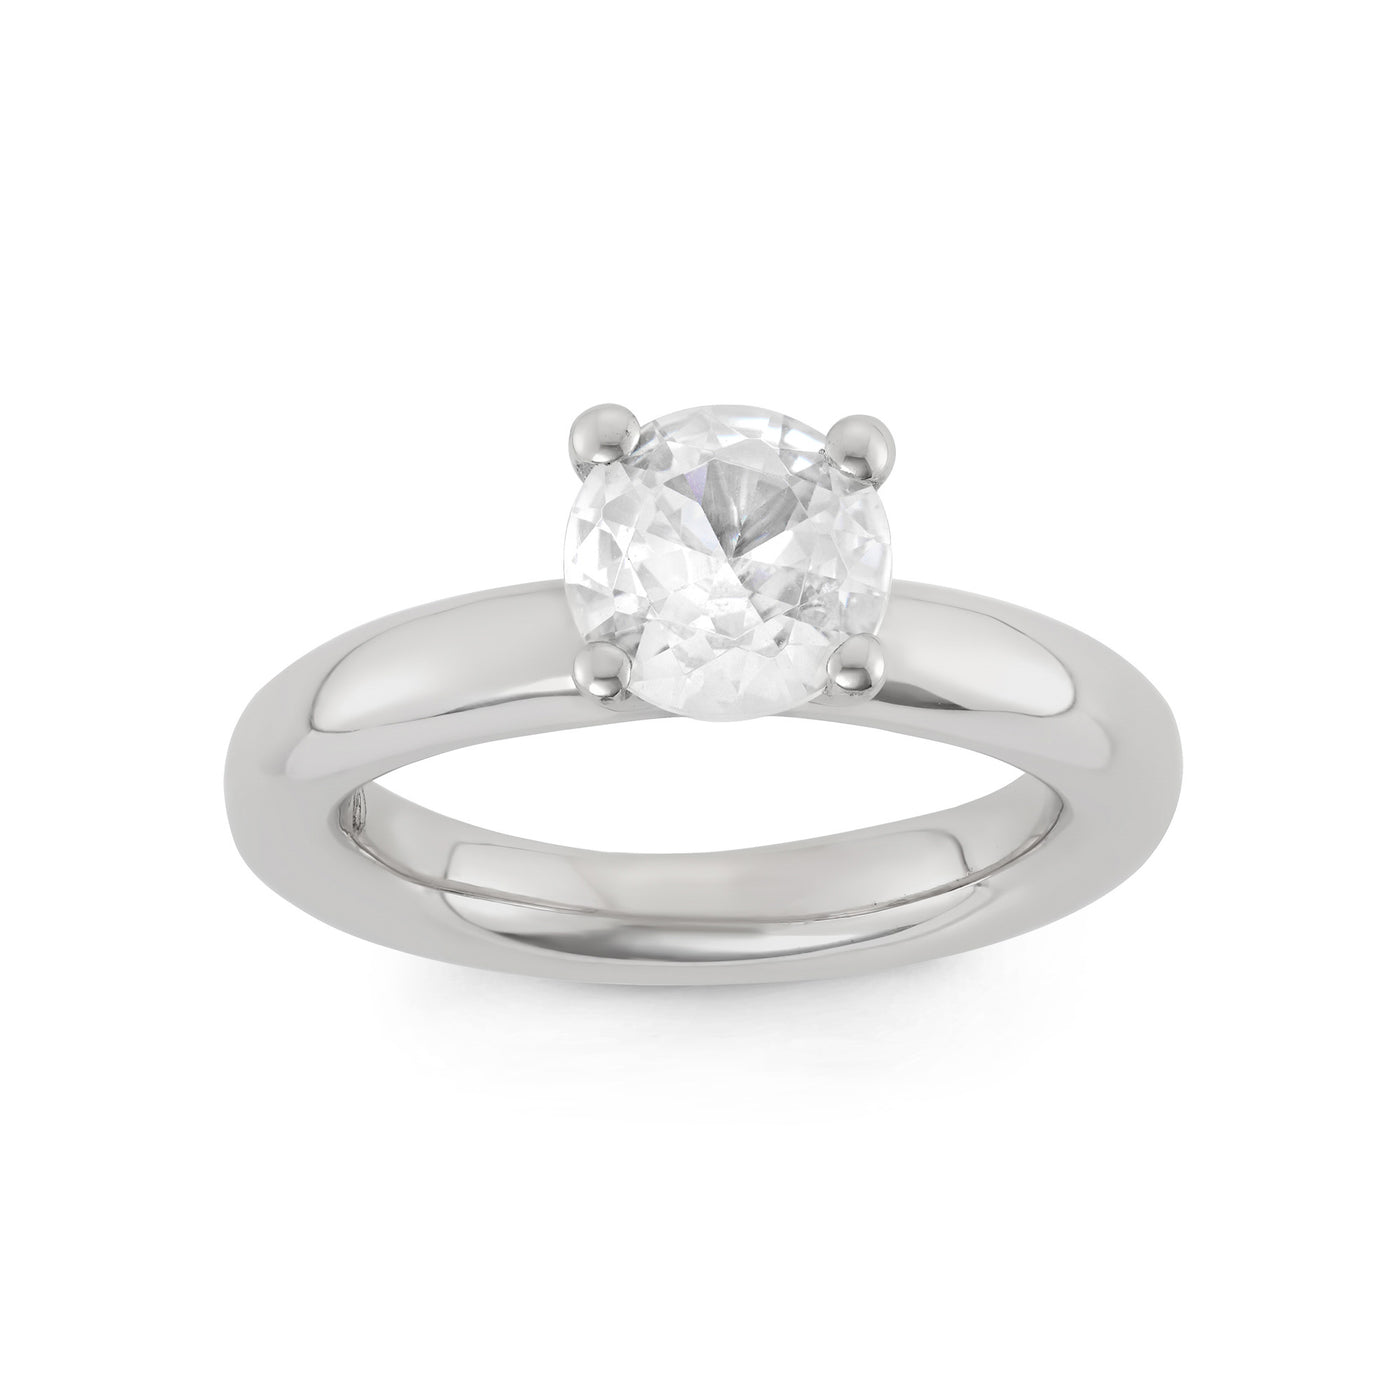 Rebecca Sloane Silver Ring With Faceted White Round CZ Center